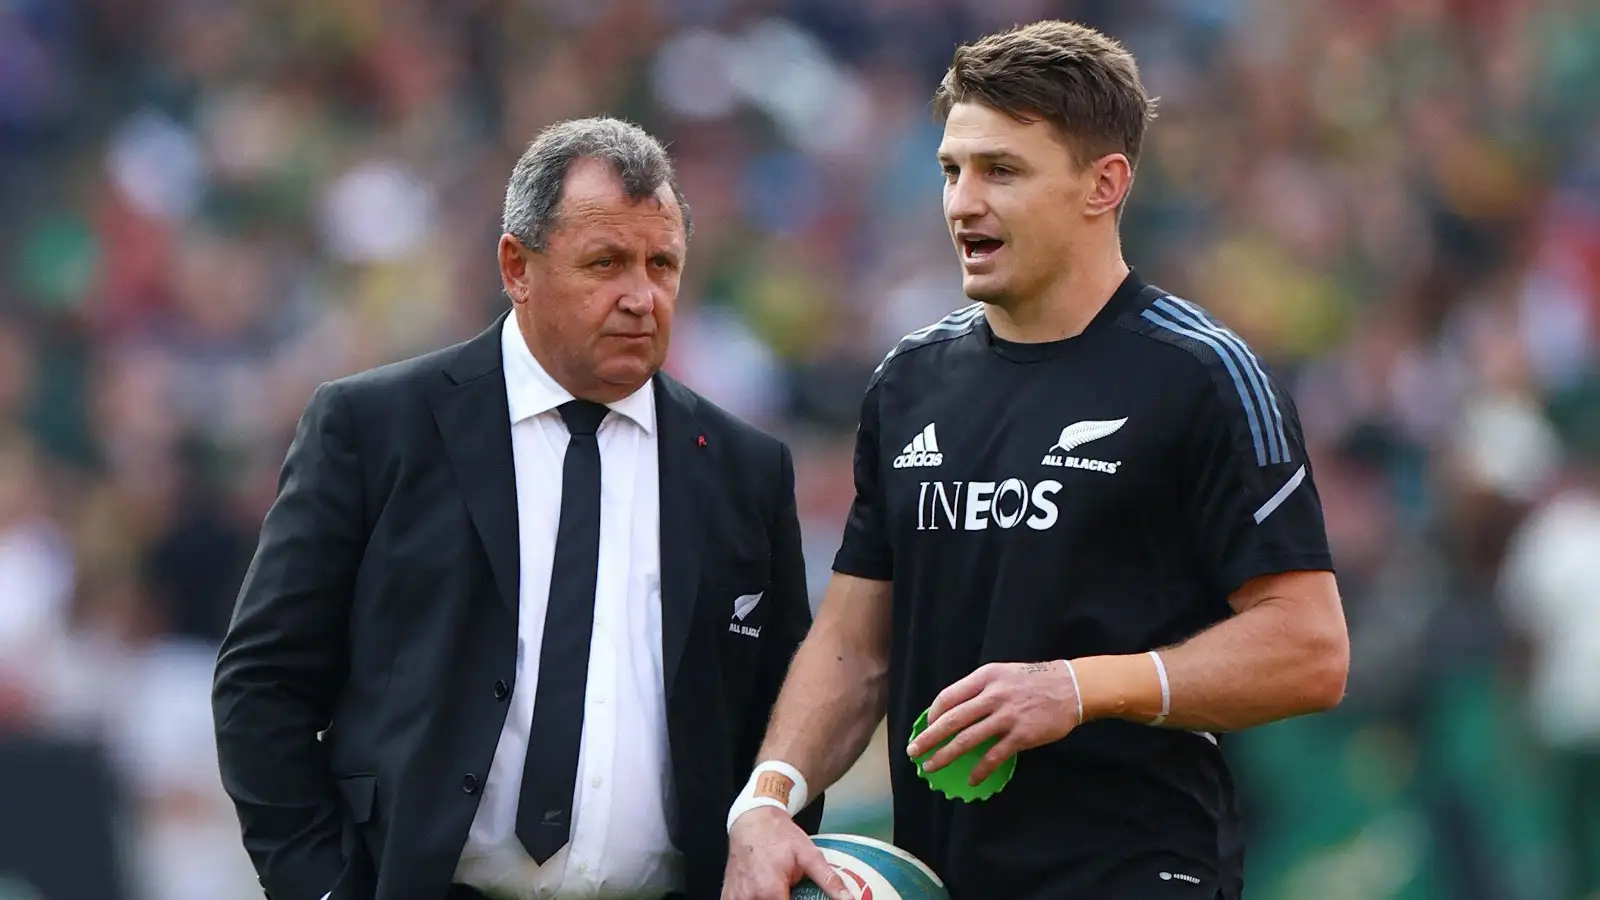 All Blacks: Beauden Barrett and Brodie Retallick on bench as unchanged starting XV named to face Argentina